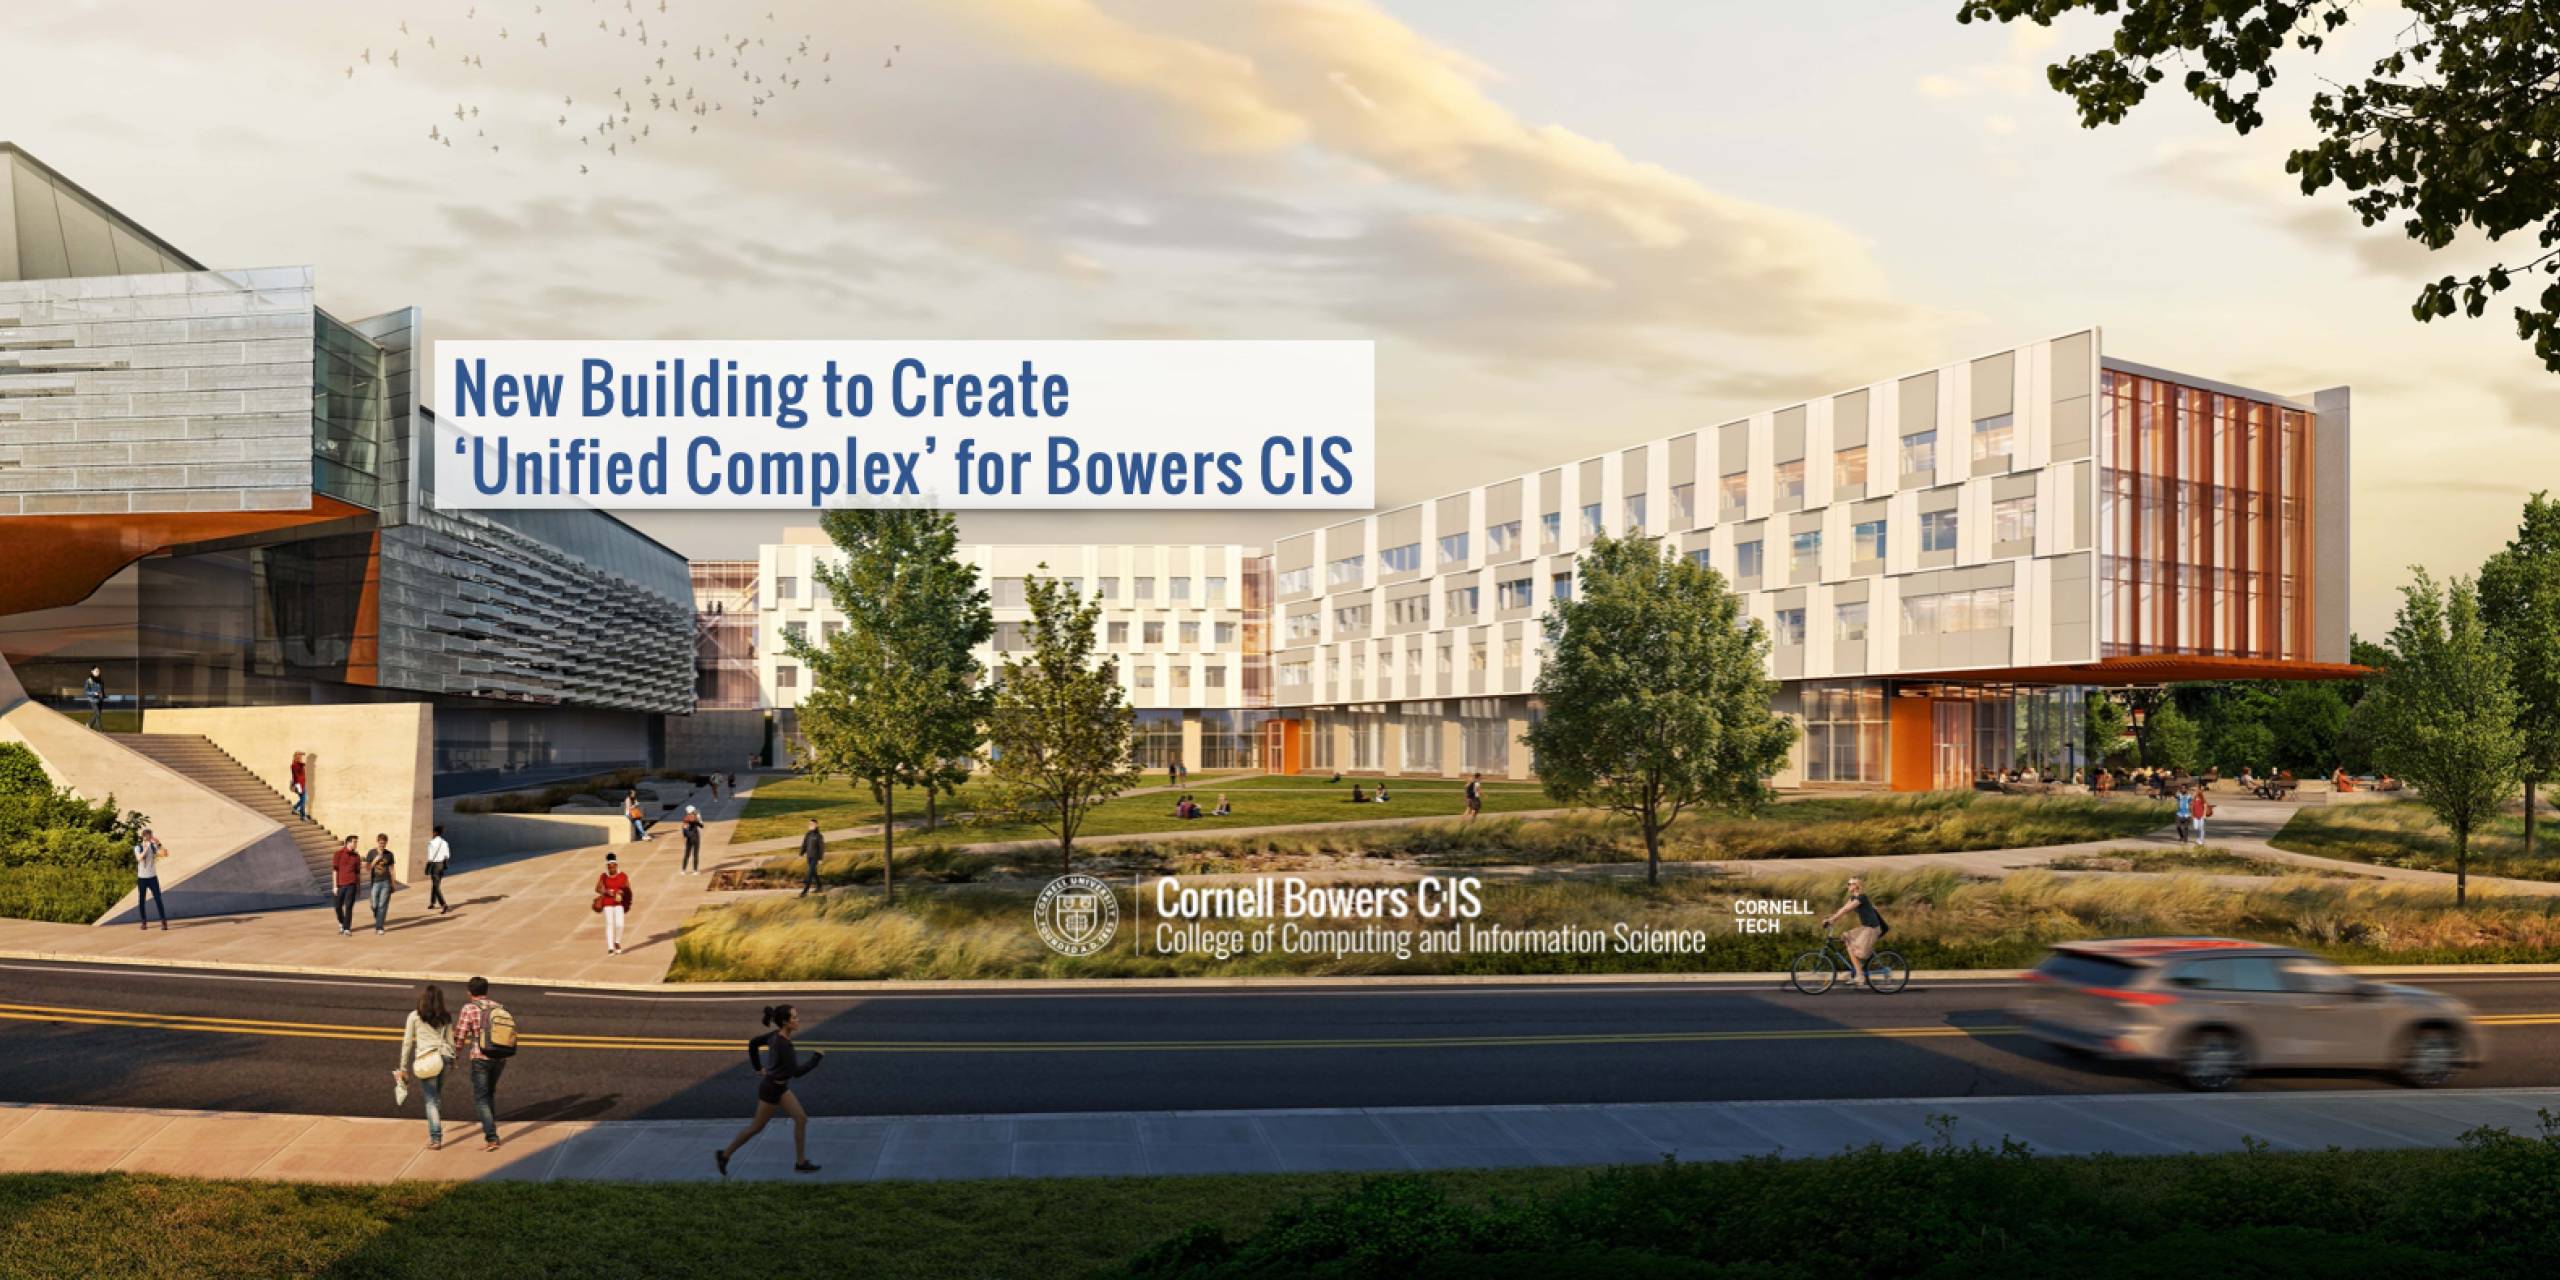 New Building to Create ‘Unified Complex’ for Bowers CIS